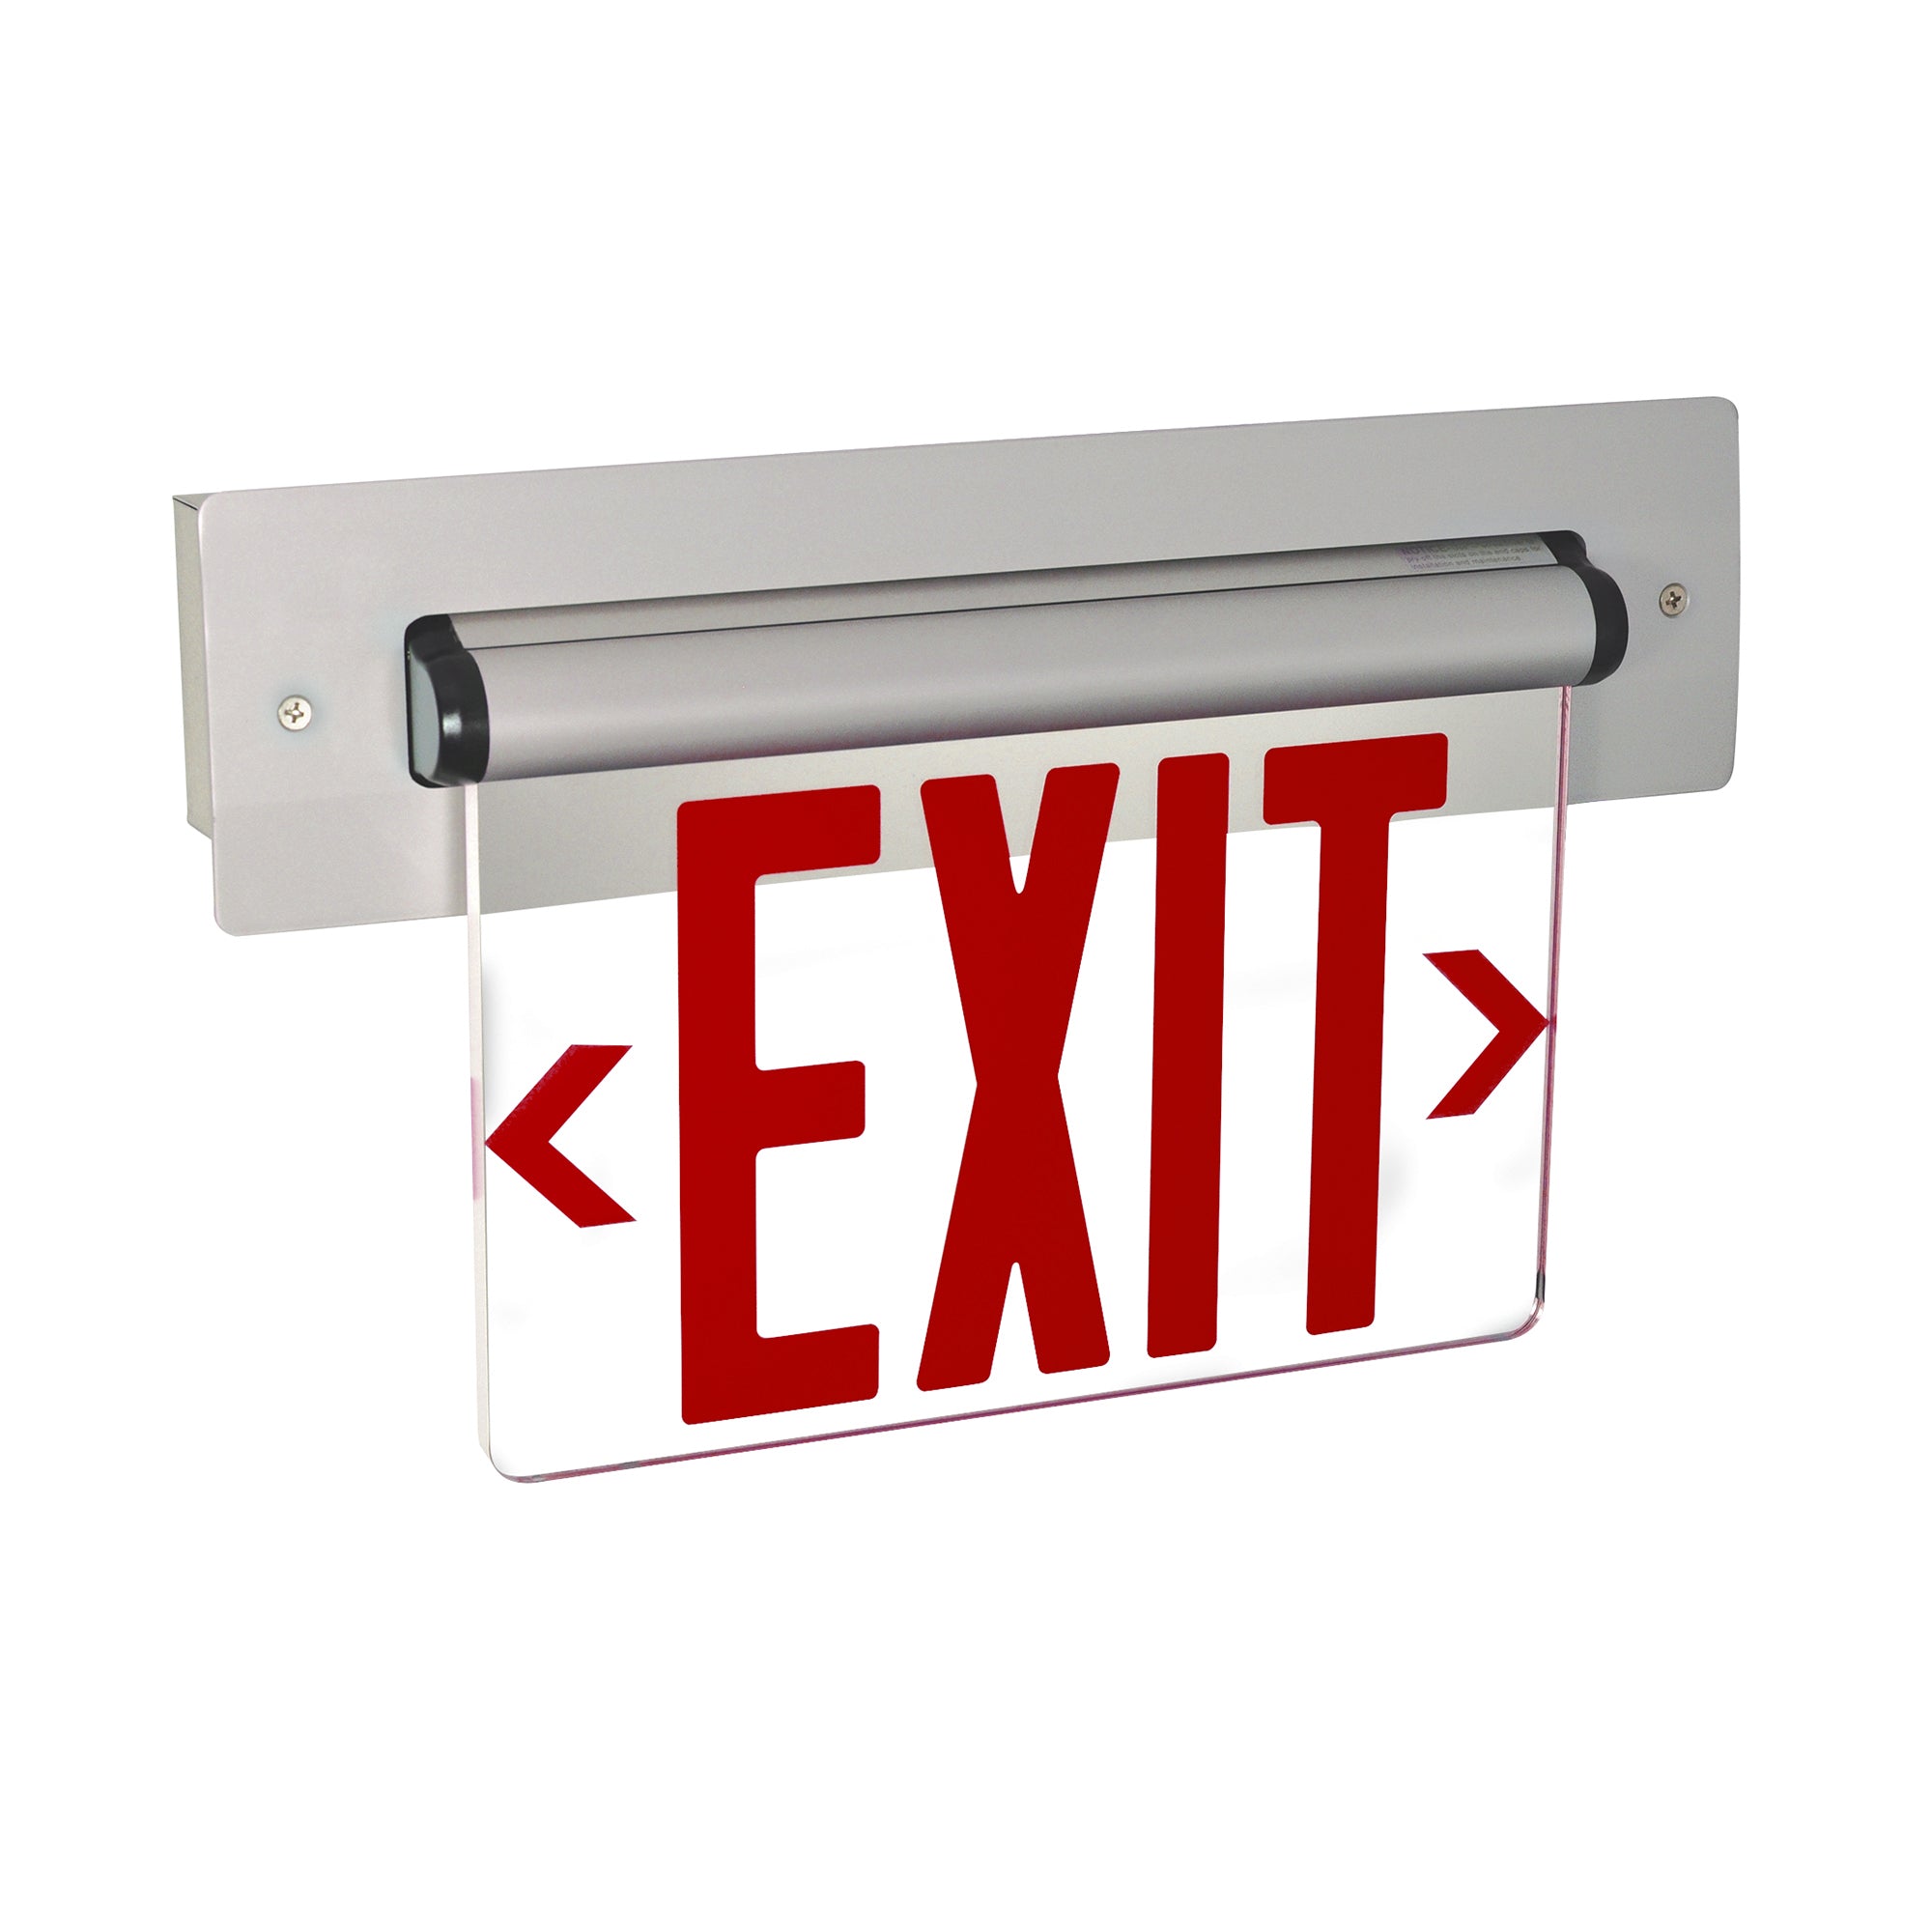 Nora Lighting NX-814-LEDRCA - Exit / Emergency - Recessed Adjustable LED Edge-Lit Exit Sign, 2 Circuit, 6 Inch Red Letters, Single Face / Clear Acrylic, Aluminum Housing